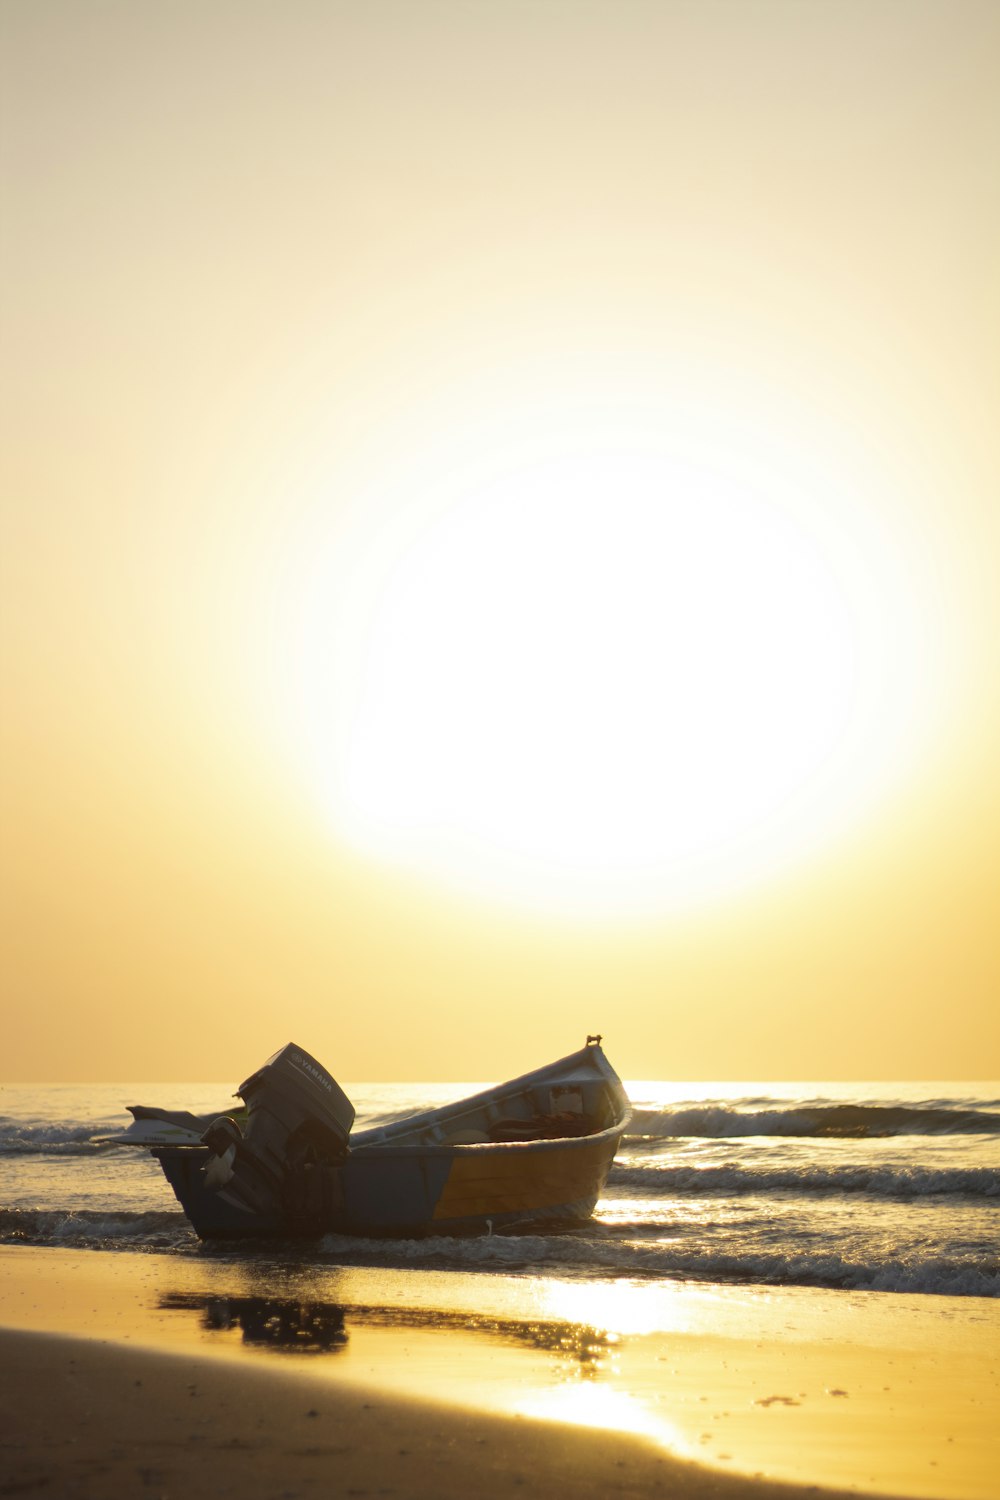 brown boat on beach during sunset